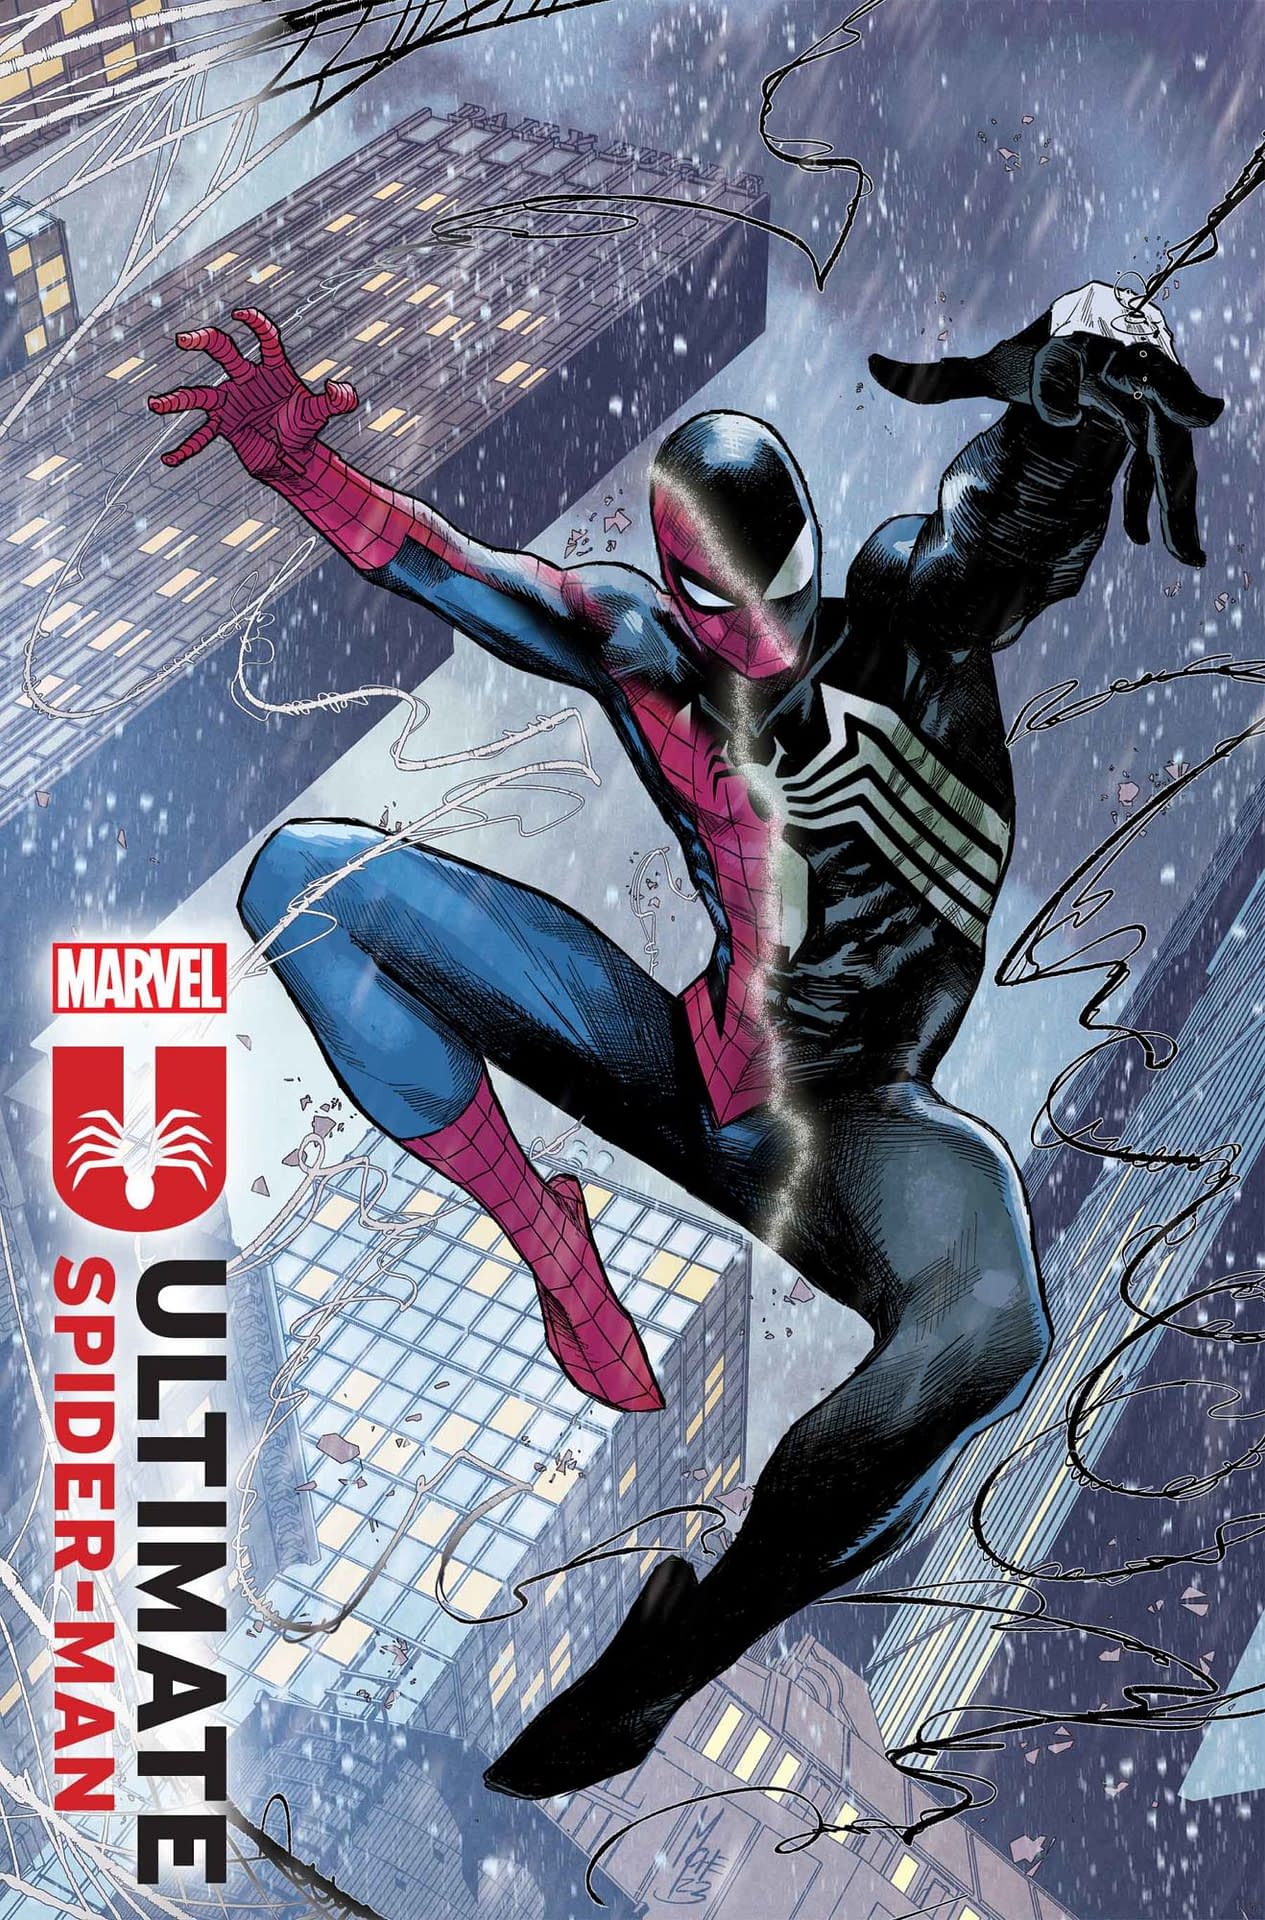 So Who Is The New Ultimate Spider-Man, Then?